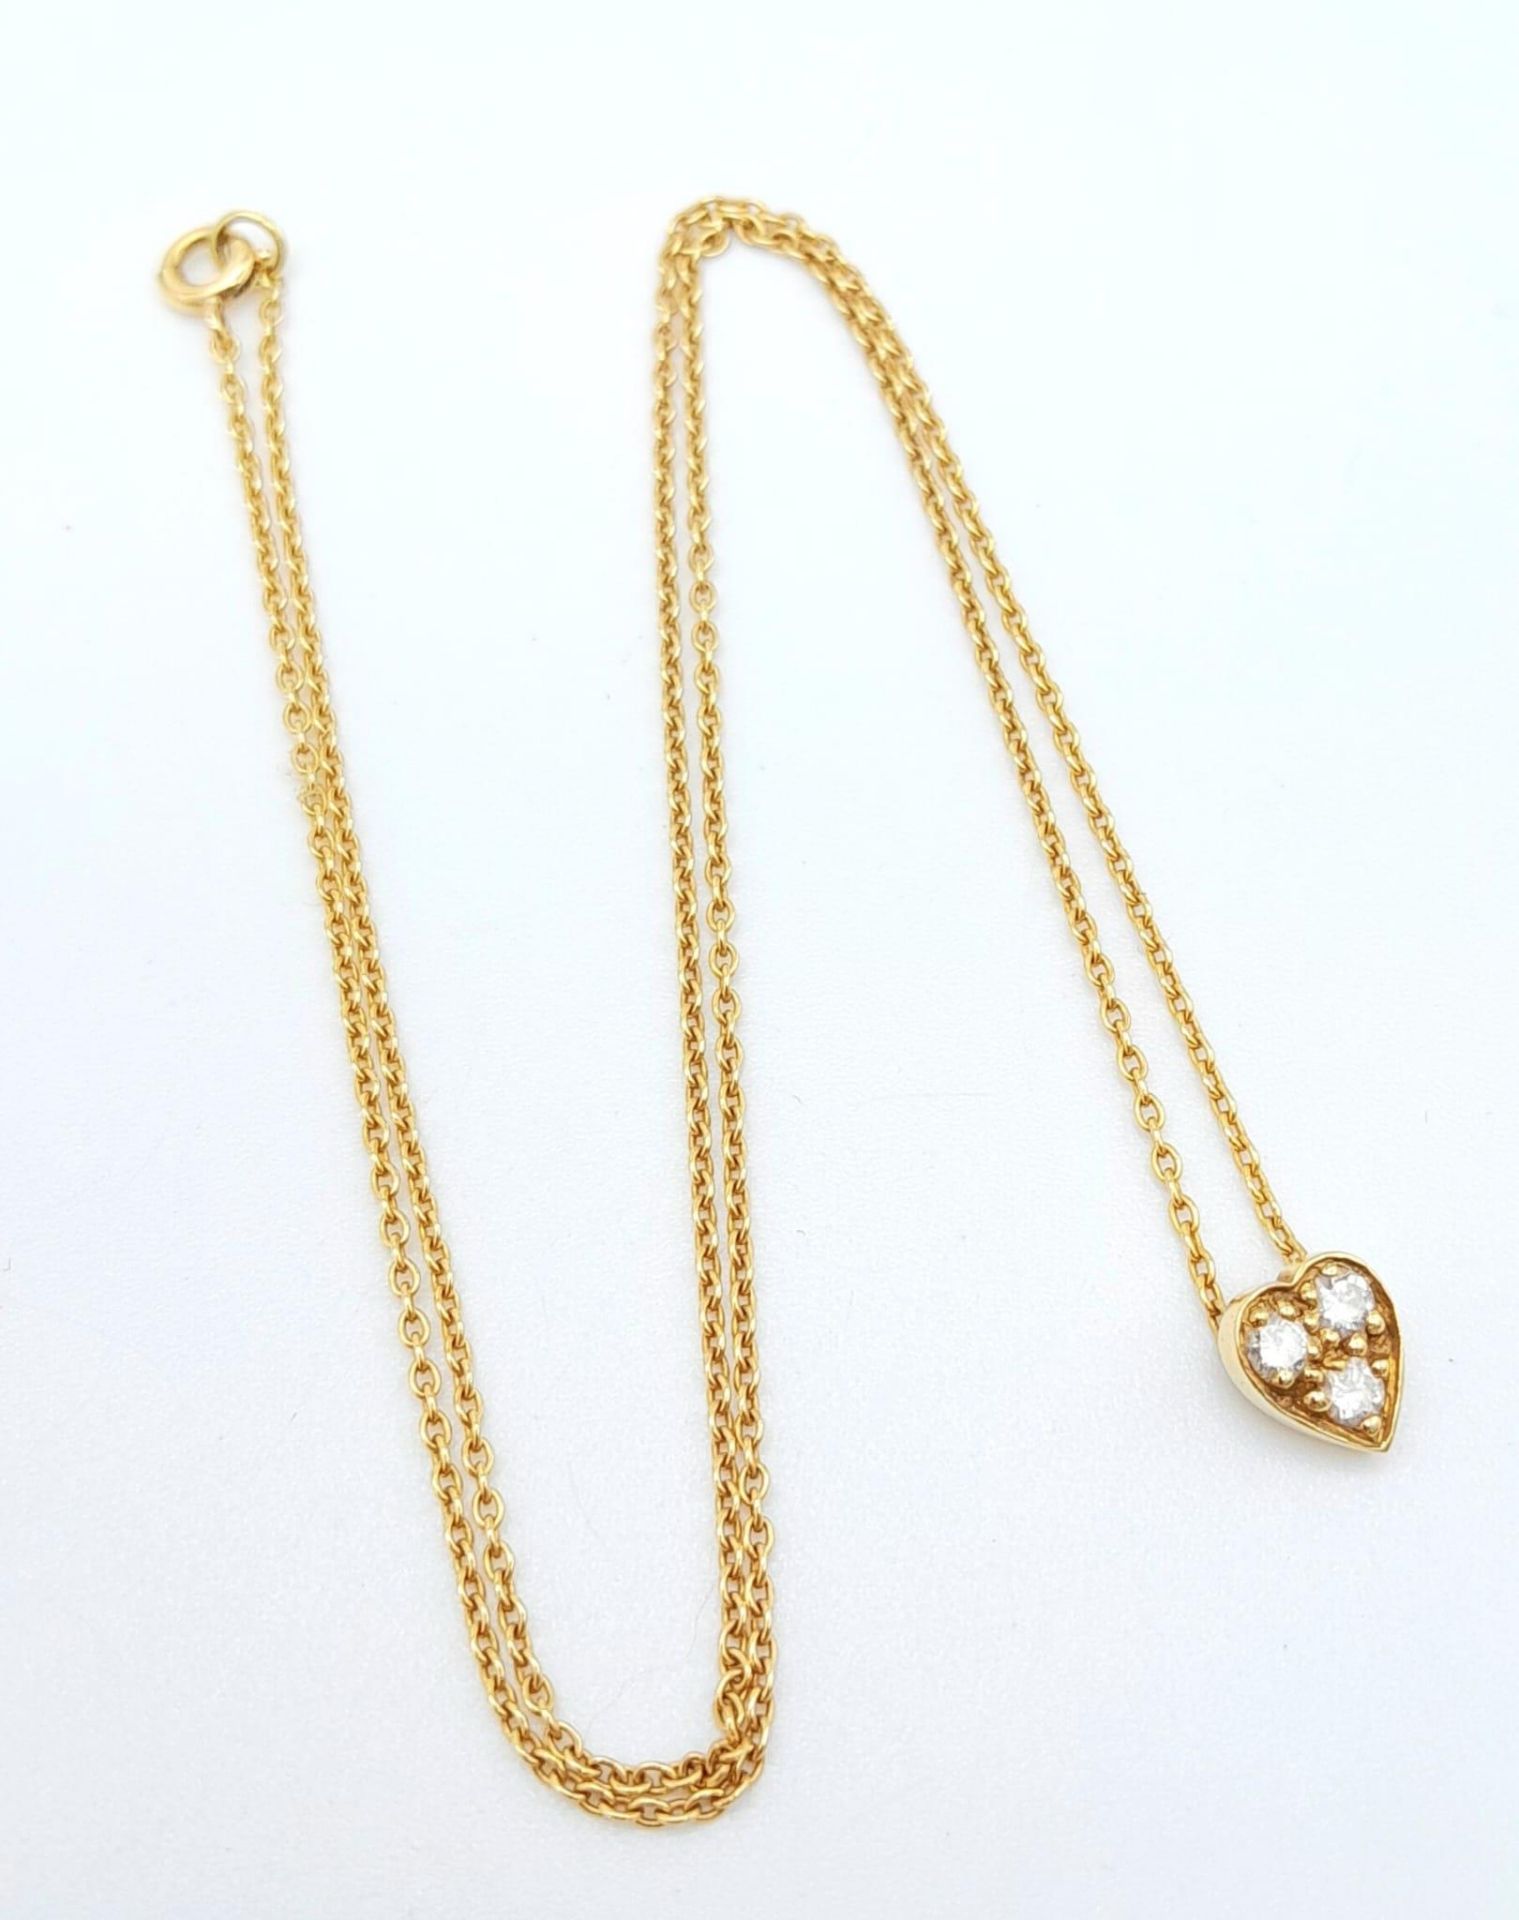 An 18K Diamond Heart Pendant on an 18K Yellow Gold Disappearing Necklace. Pendant - 6mm. 40cm